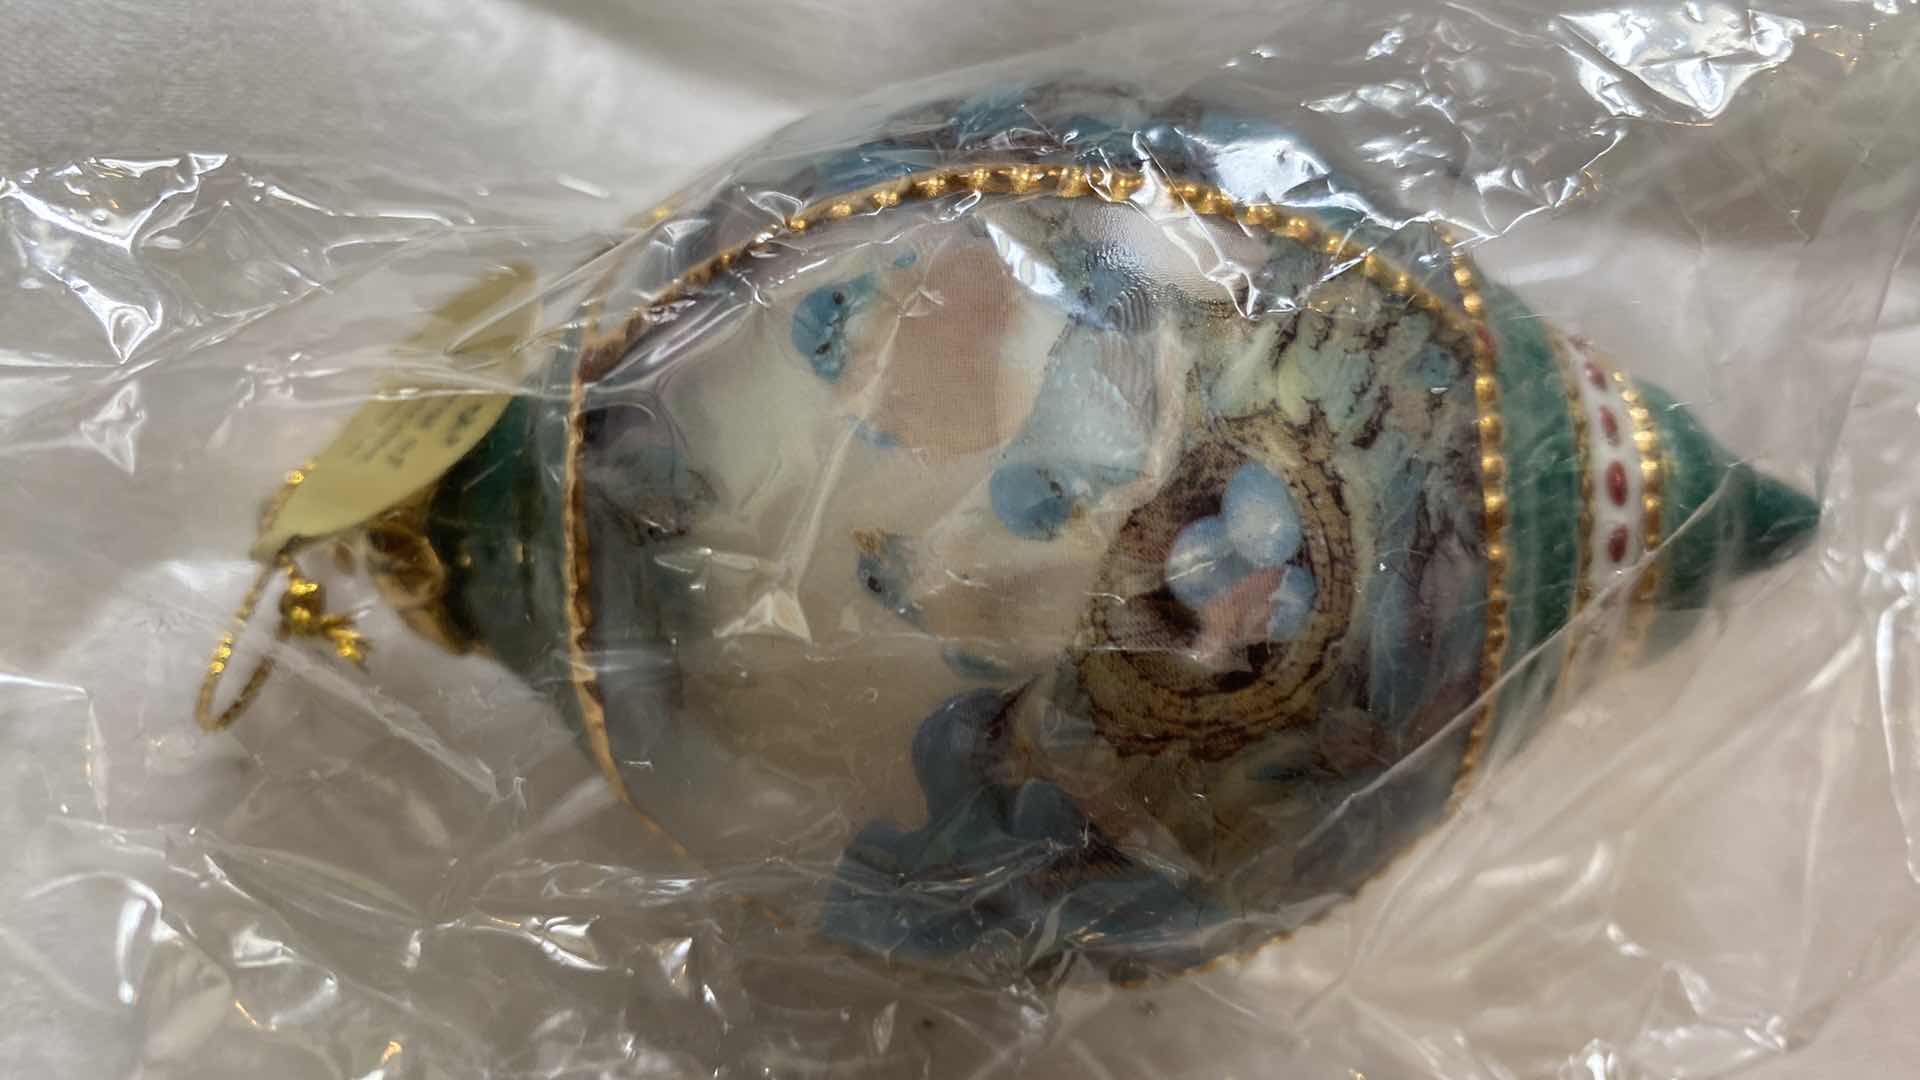 Photo 5 of VINTAGE THREE LENA LIU’s NATURES POETRY PORCELAIN ORNAMENTS COLLECTIBLES BY BRADFORD EXCHANGE WITH CERTIFICATE OF AUTHENTICITY